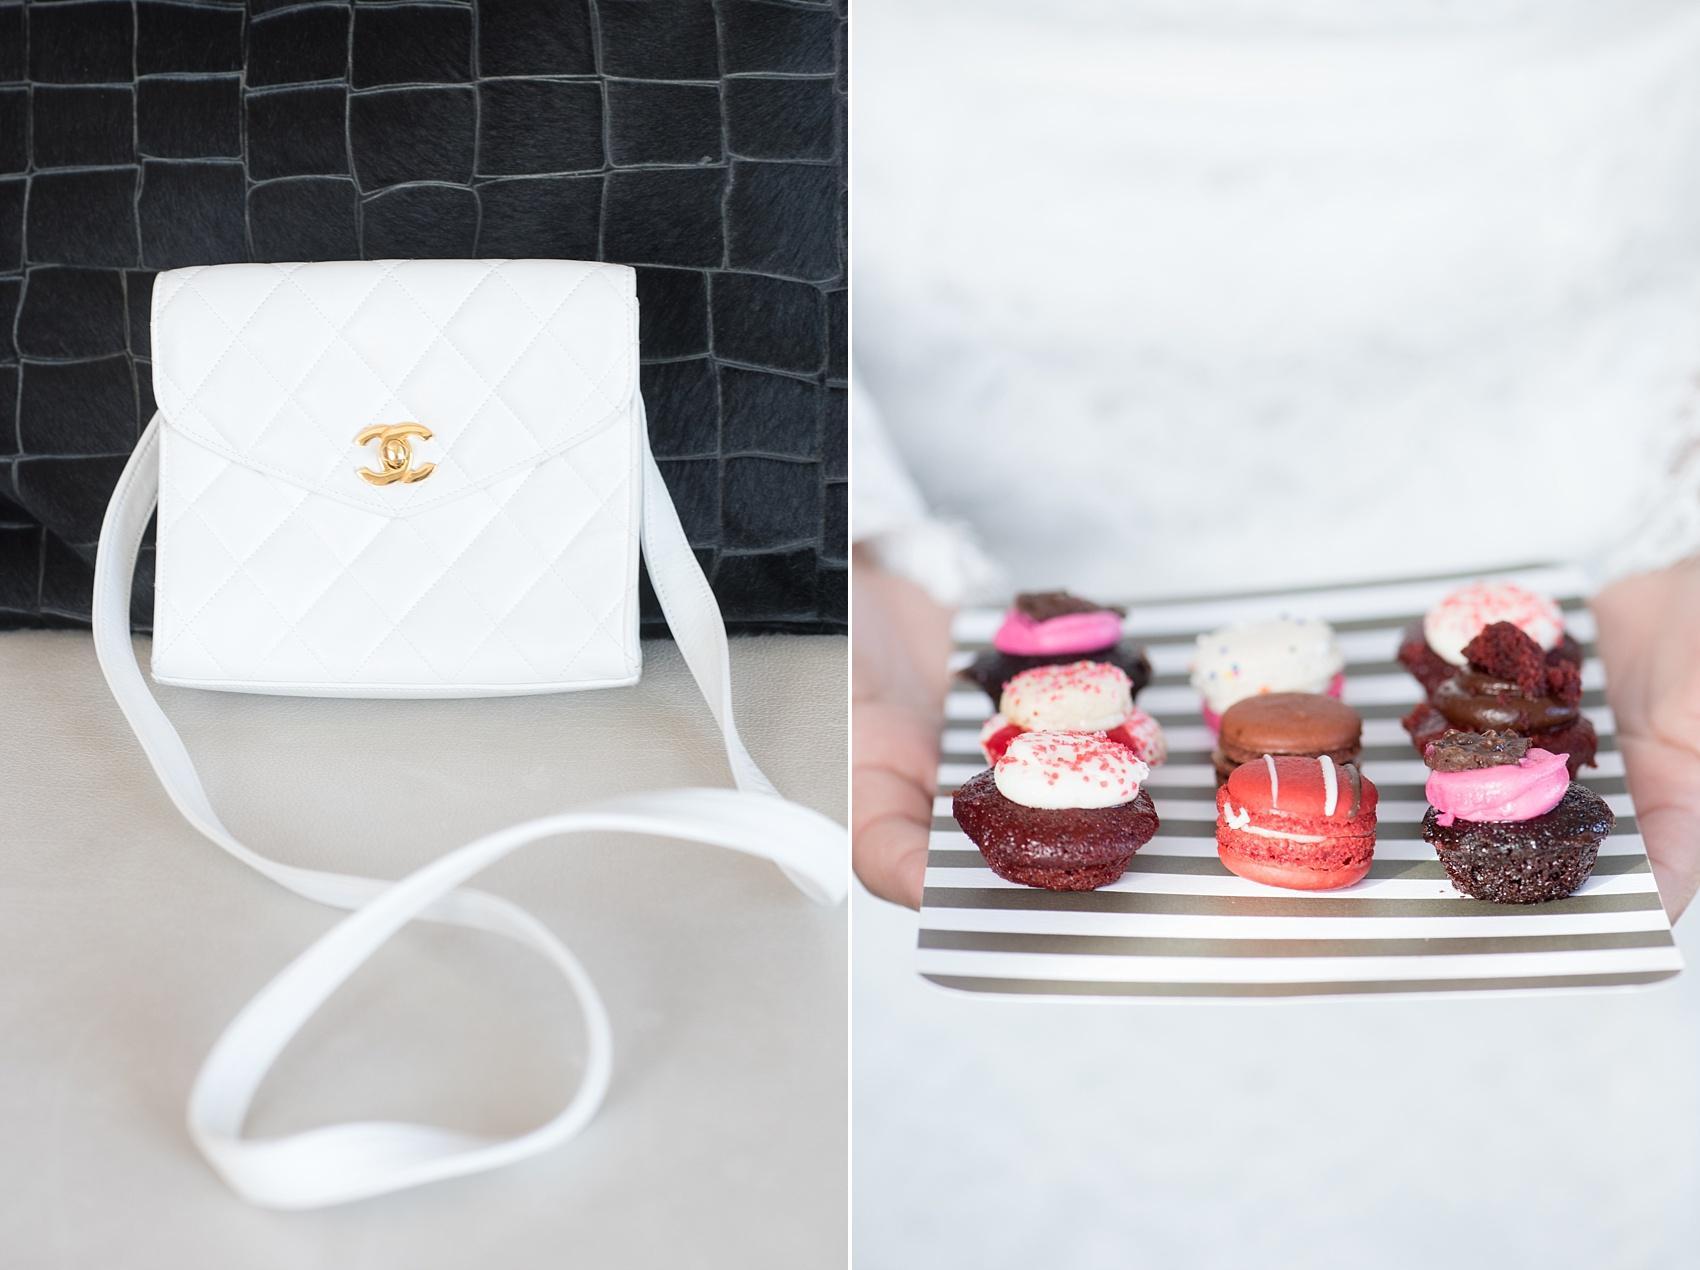 The bride gets ready for her wedding day with Baked by Melissa mini cupcakes and macarons. Complete with a white Chanel bag! Images by Mikkel Paige Photography for a red, pink and black wedding. 